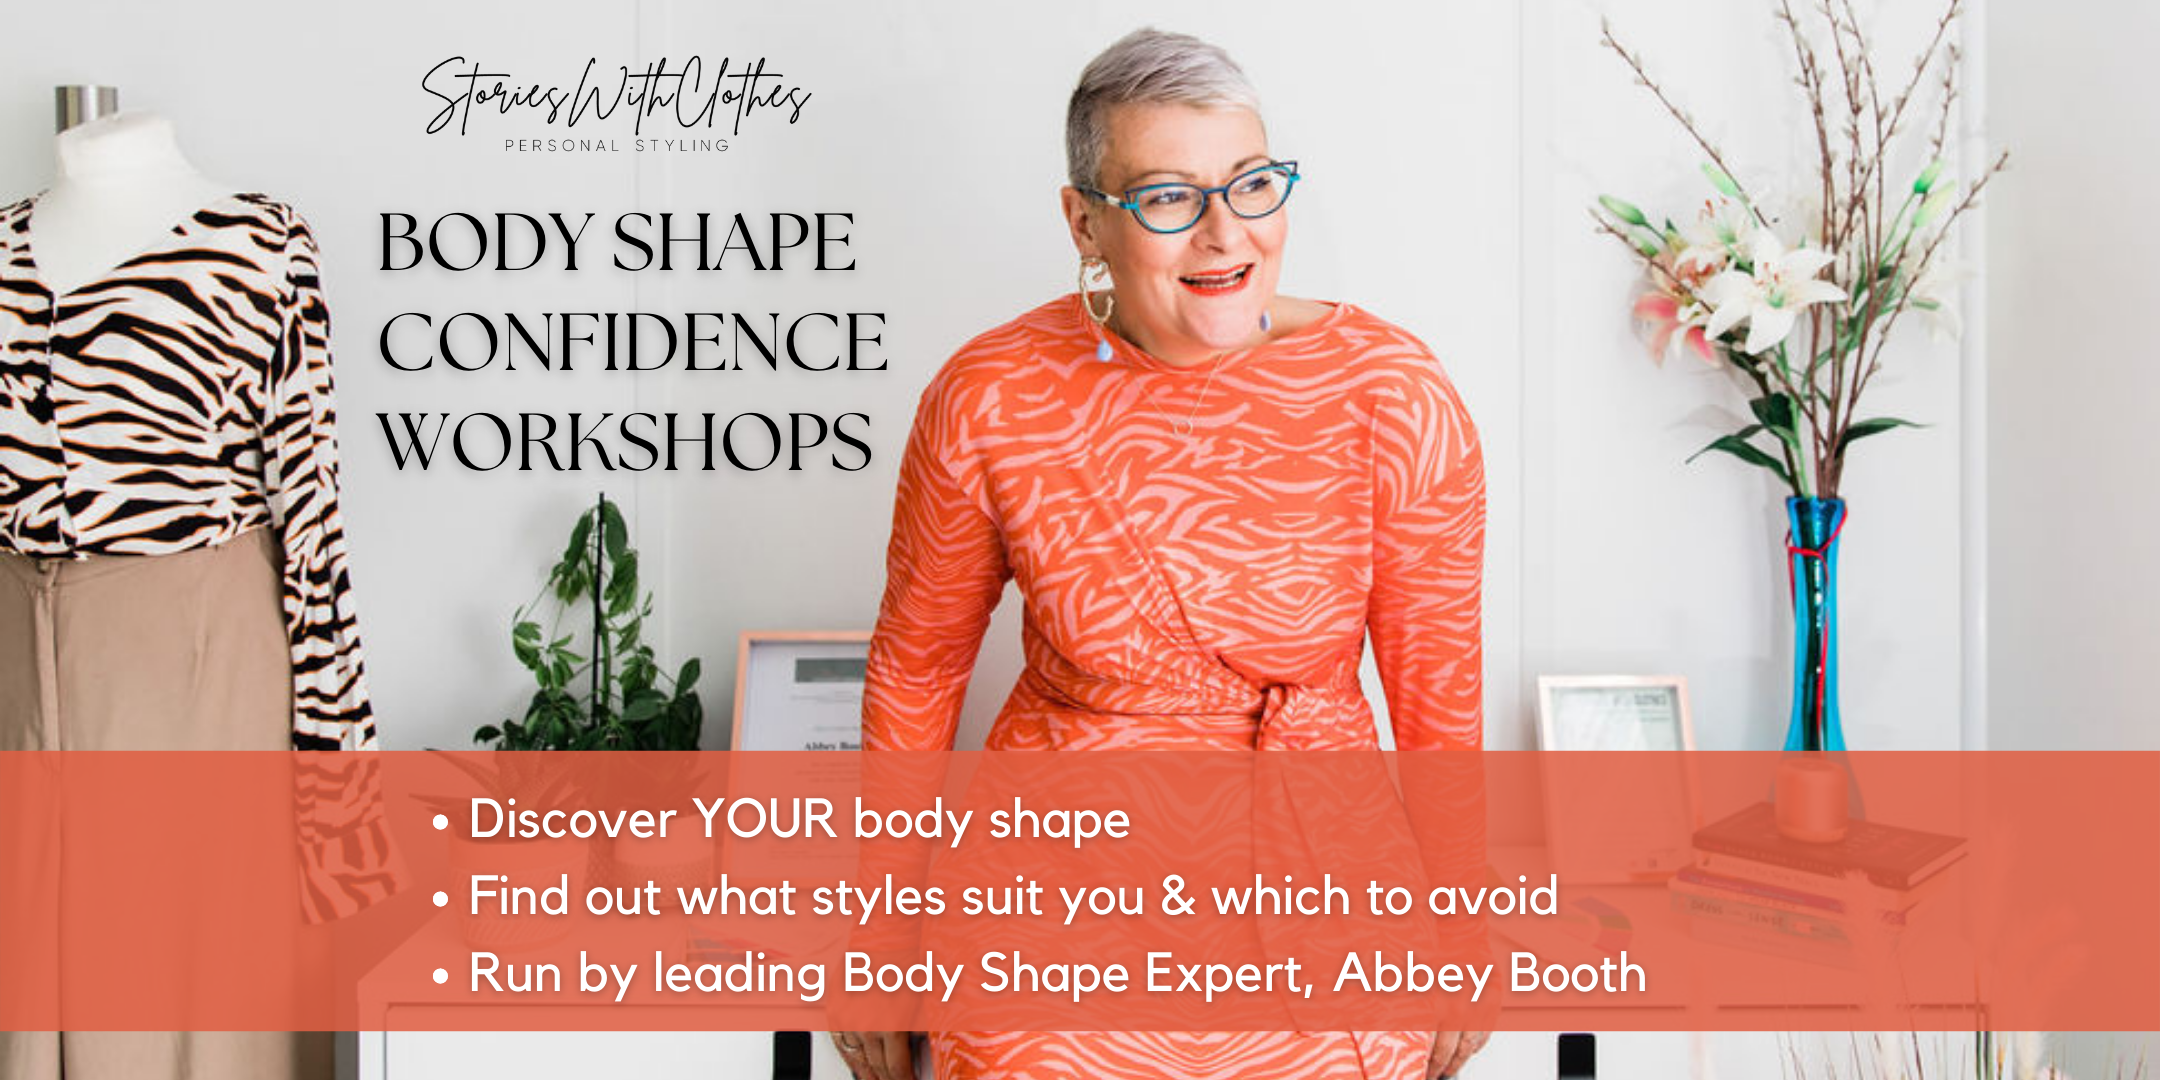 Styling - Body Shape Confidence Workshop run by top Personal Stylist Abbey Booth, founder of Stories With Clothes